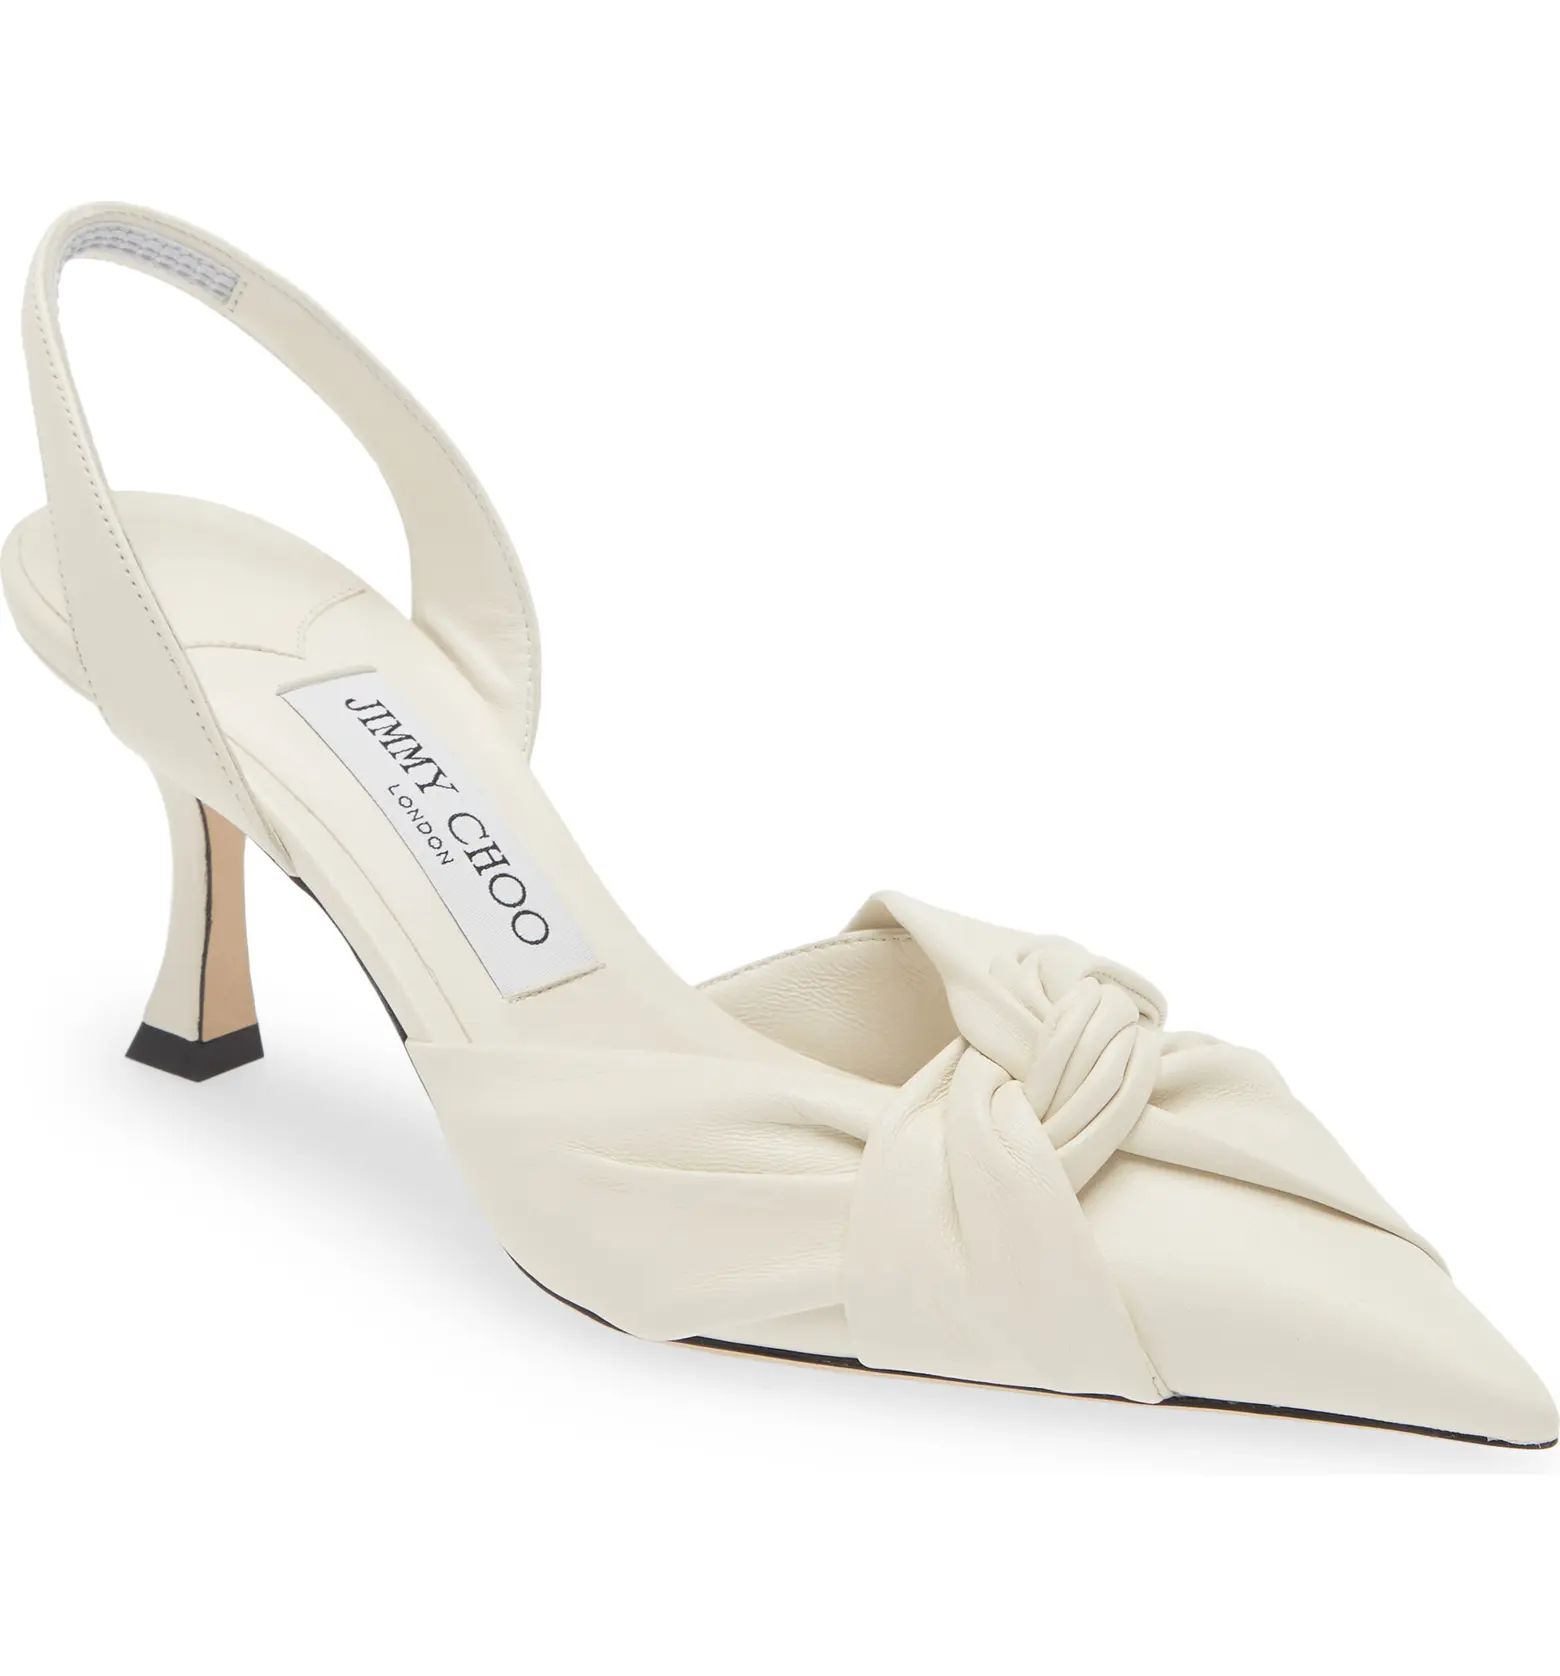 Hedera Knot Pointed Toe Slingback Pump (Women) | Nordstrom